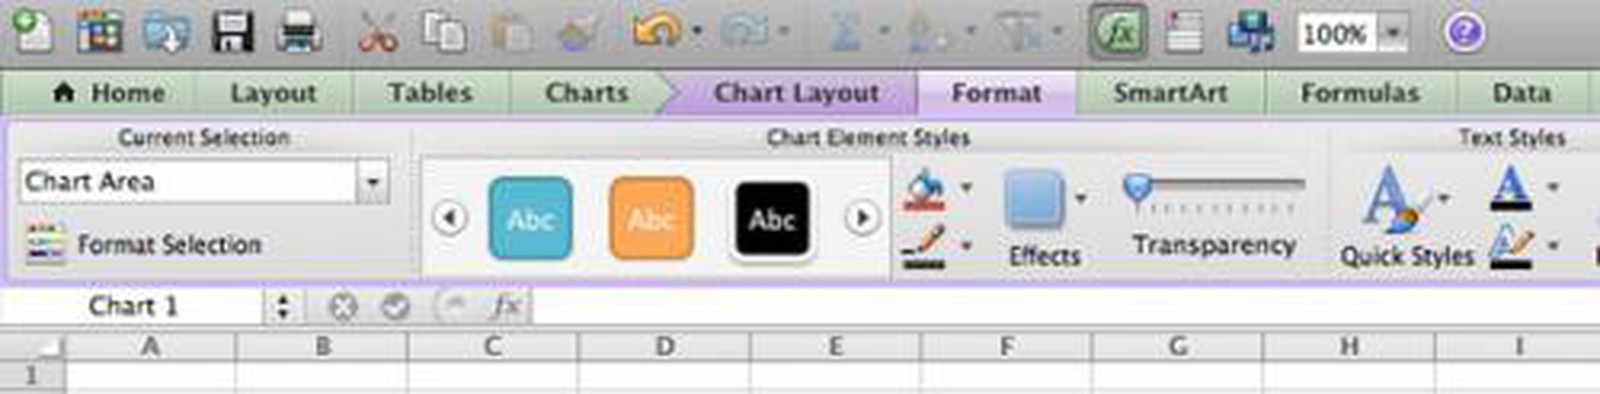 excel 2011 mac synchronous scrolling